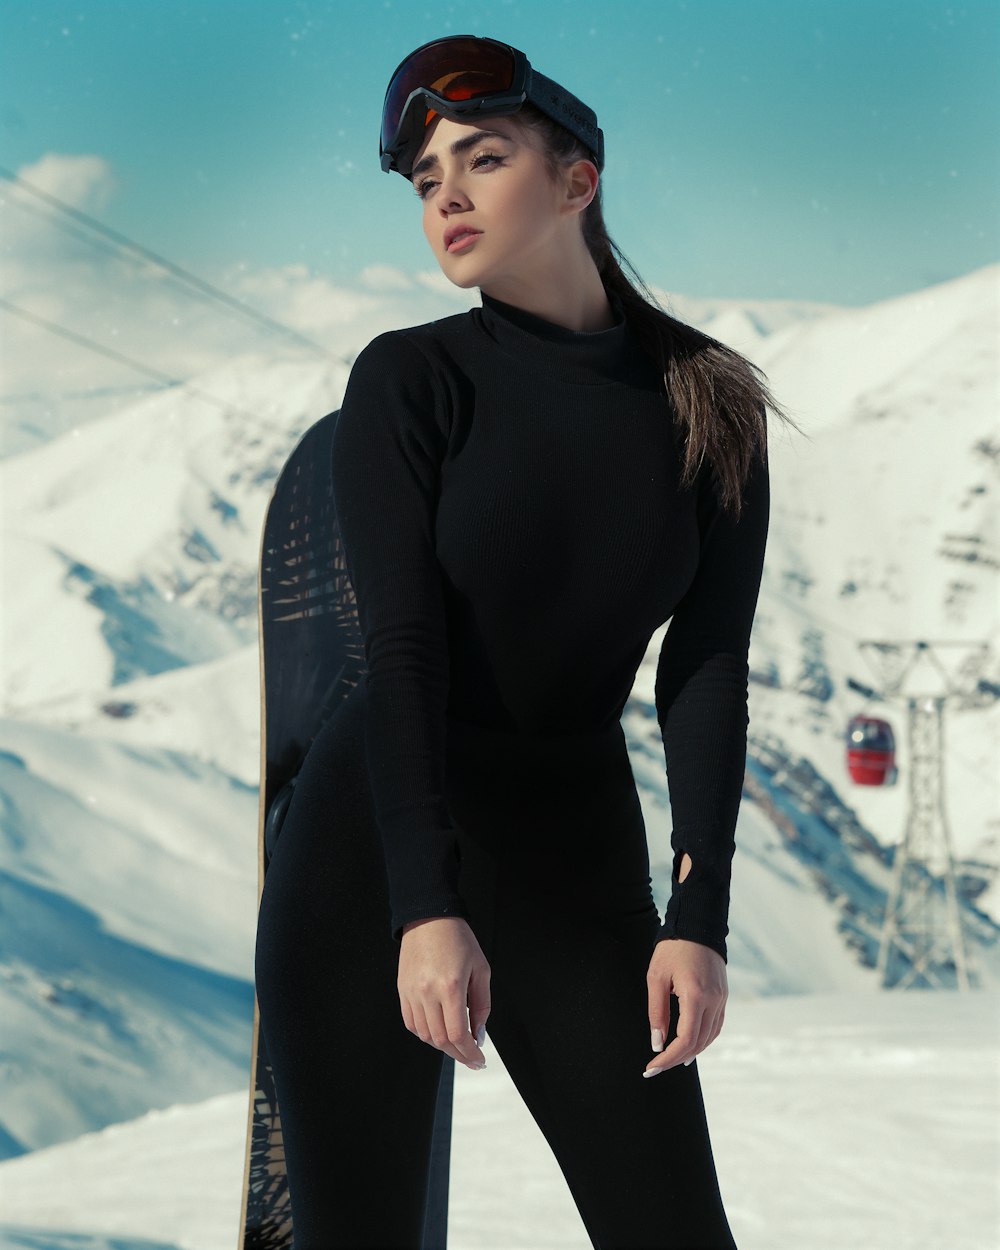 a woman in a black bodysuit holding a snowboard